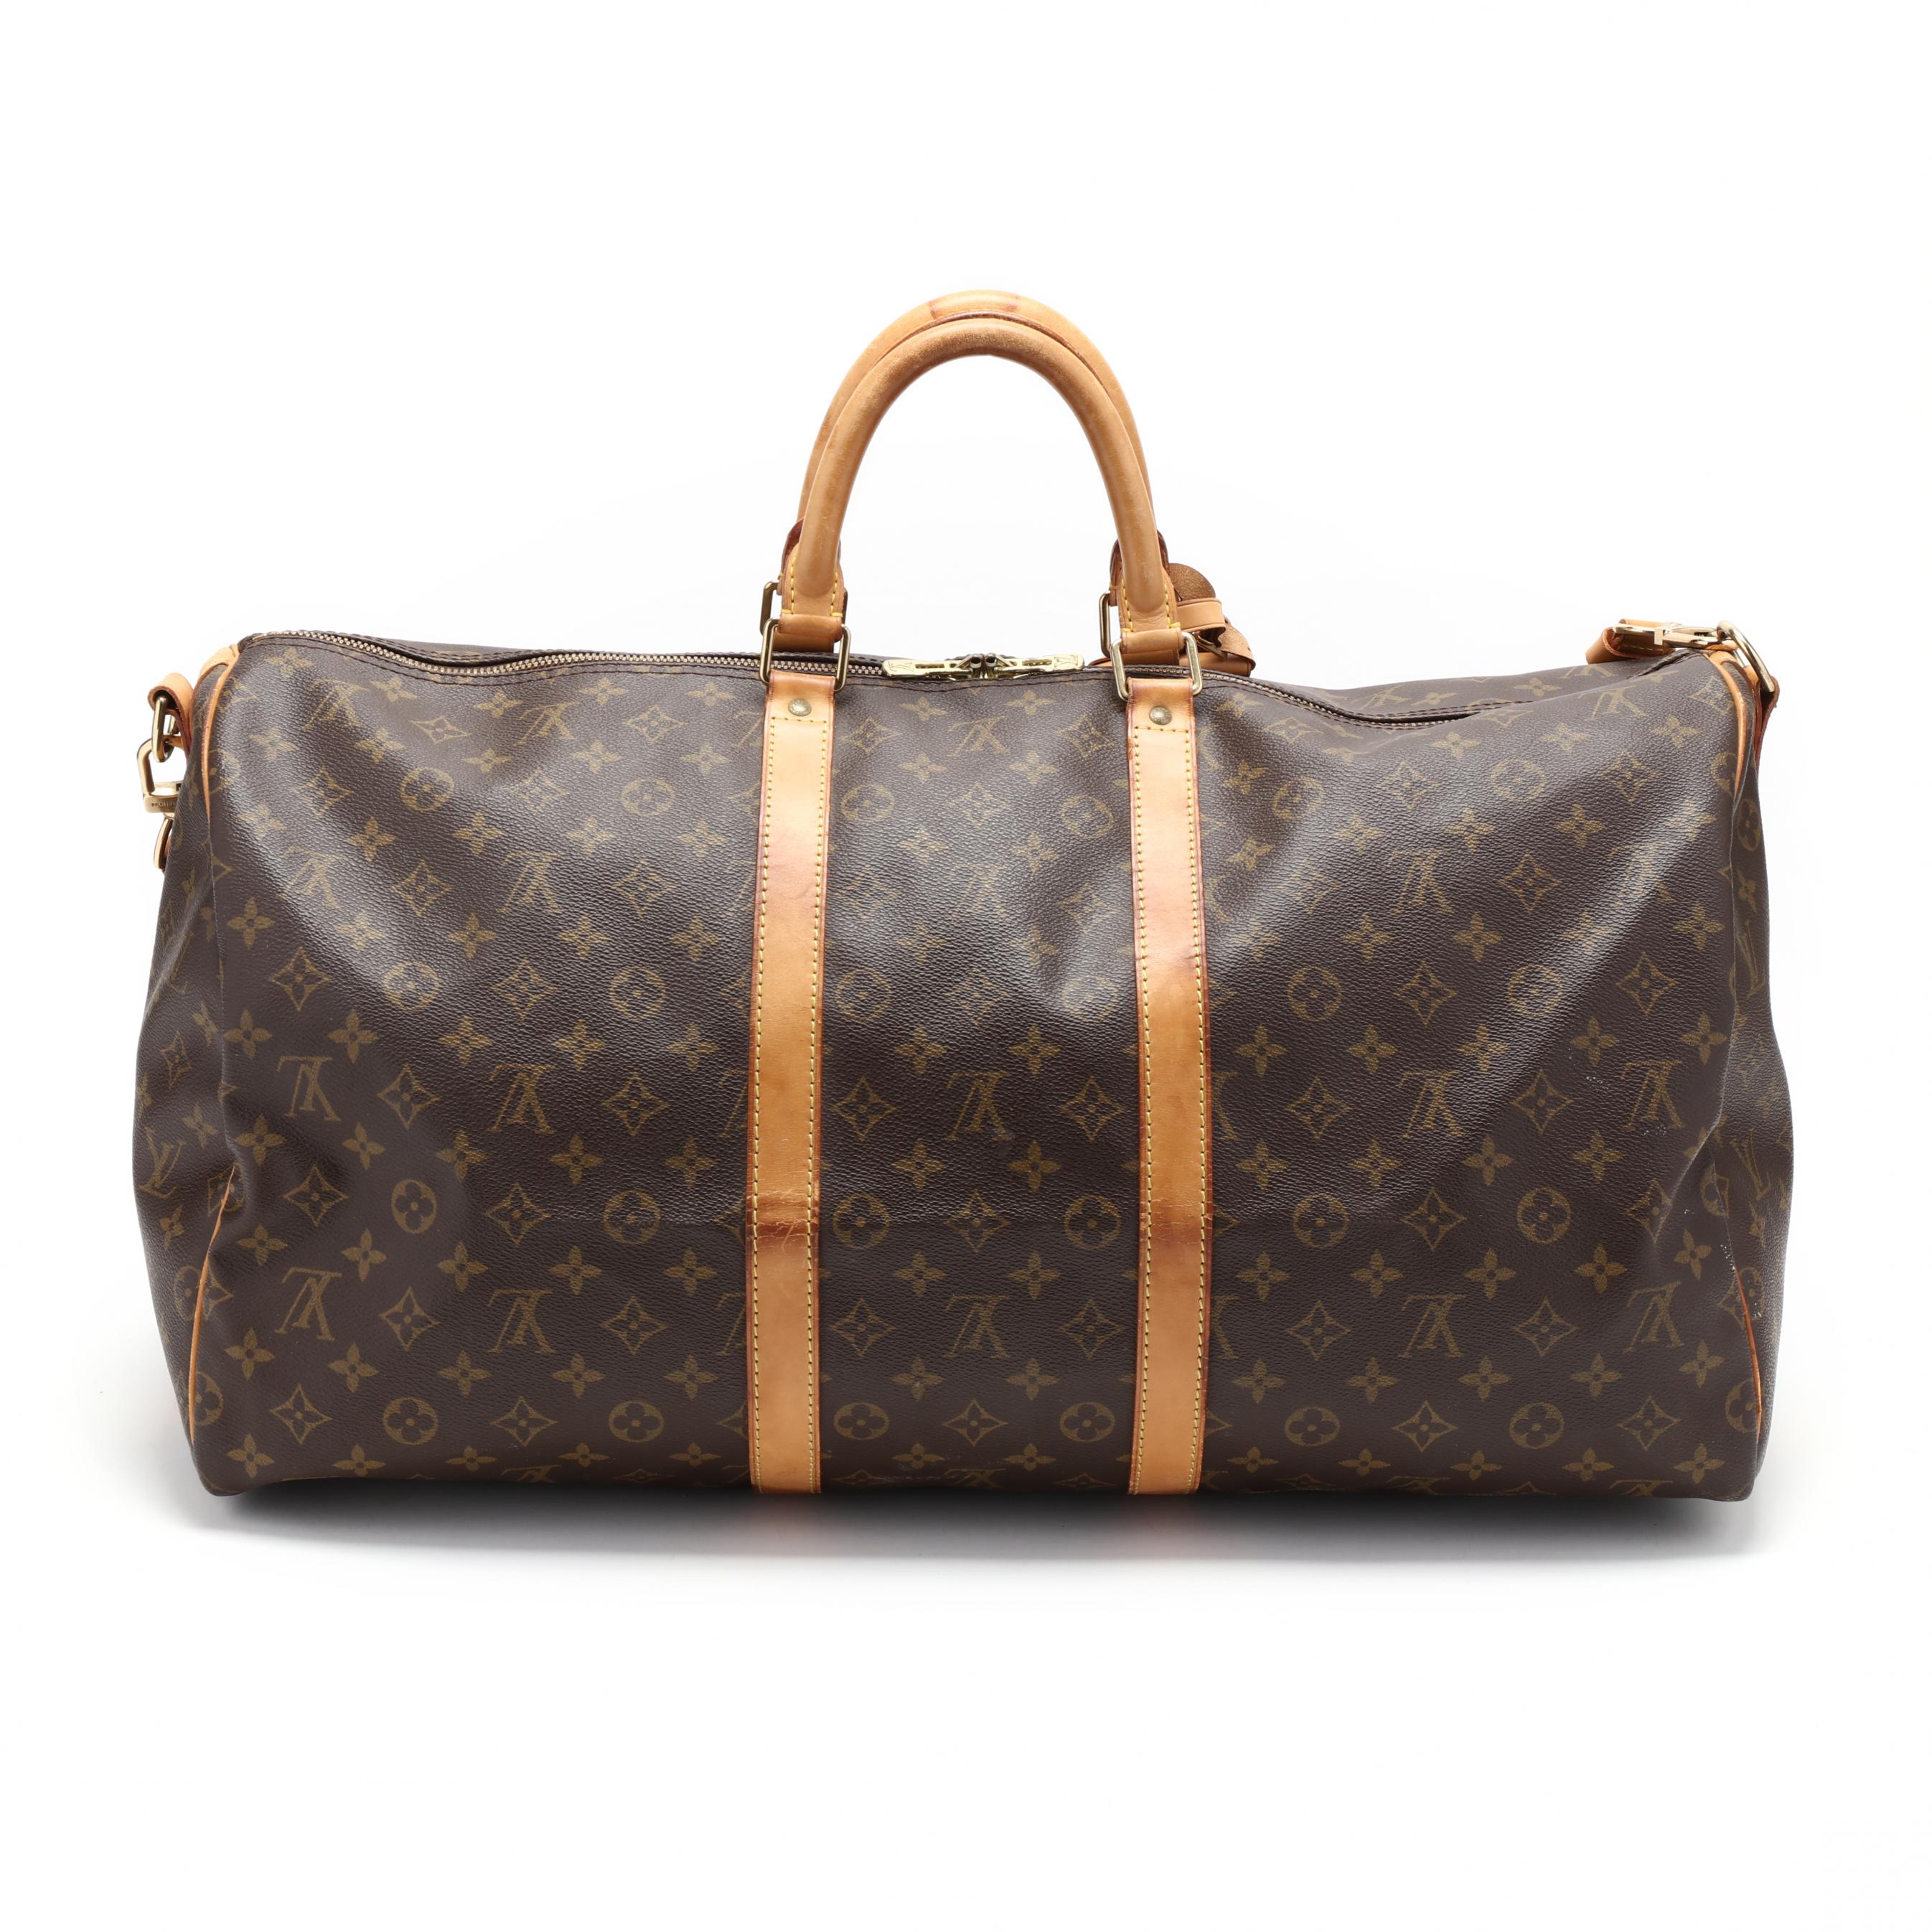 Sold at Auction: Louis Vuitton Monogram Canvas Keepall Bandouliere 60